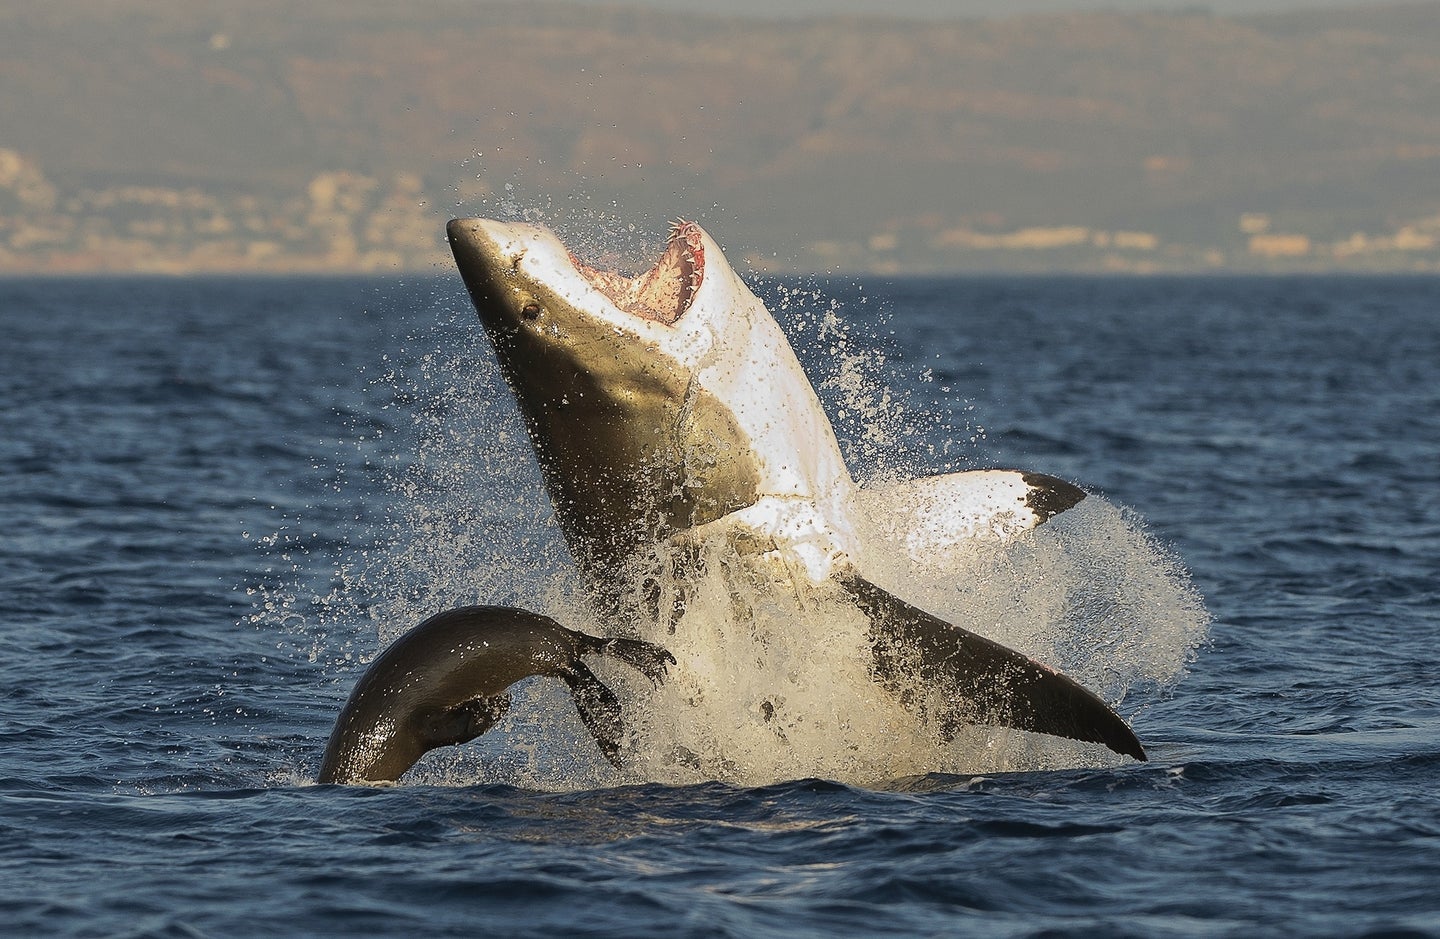 Great white shark breaching while trying to bite a seal